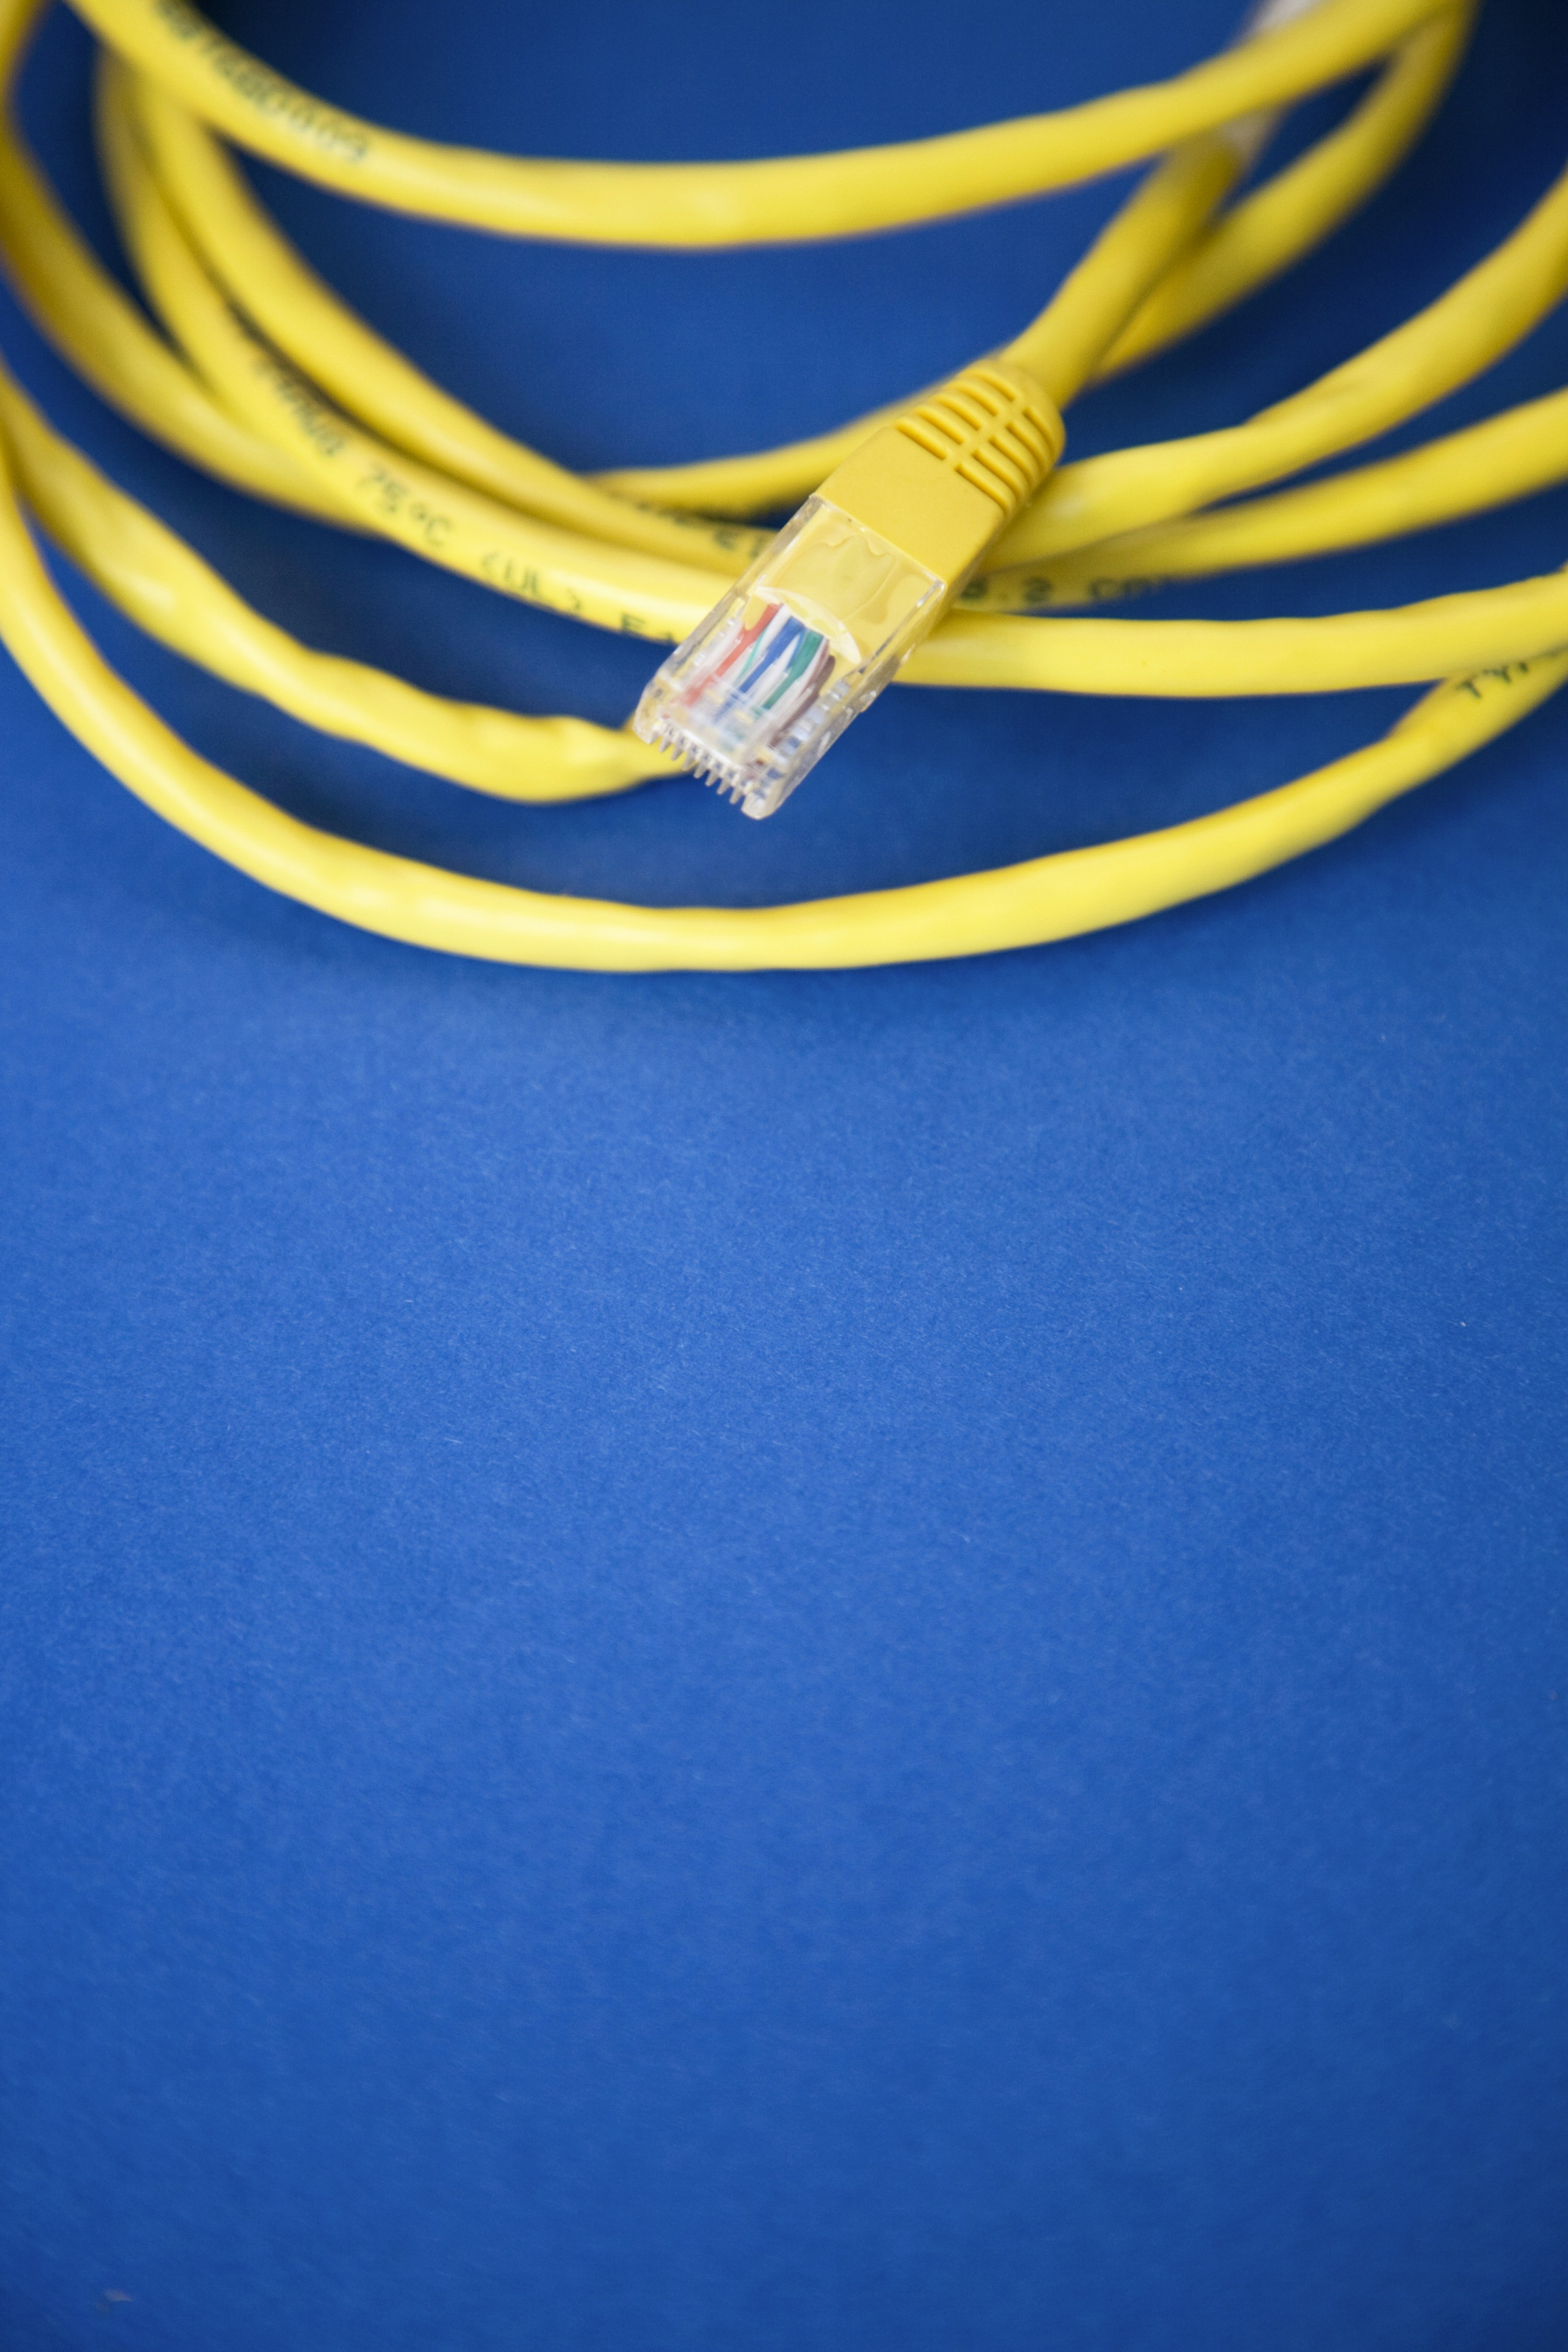 Ethernet cable on blue surface